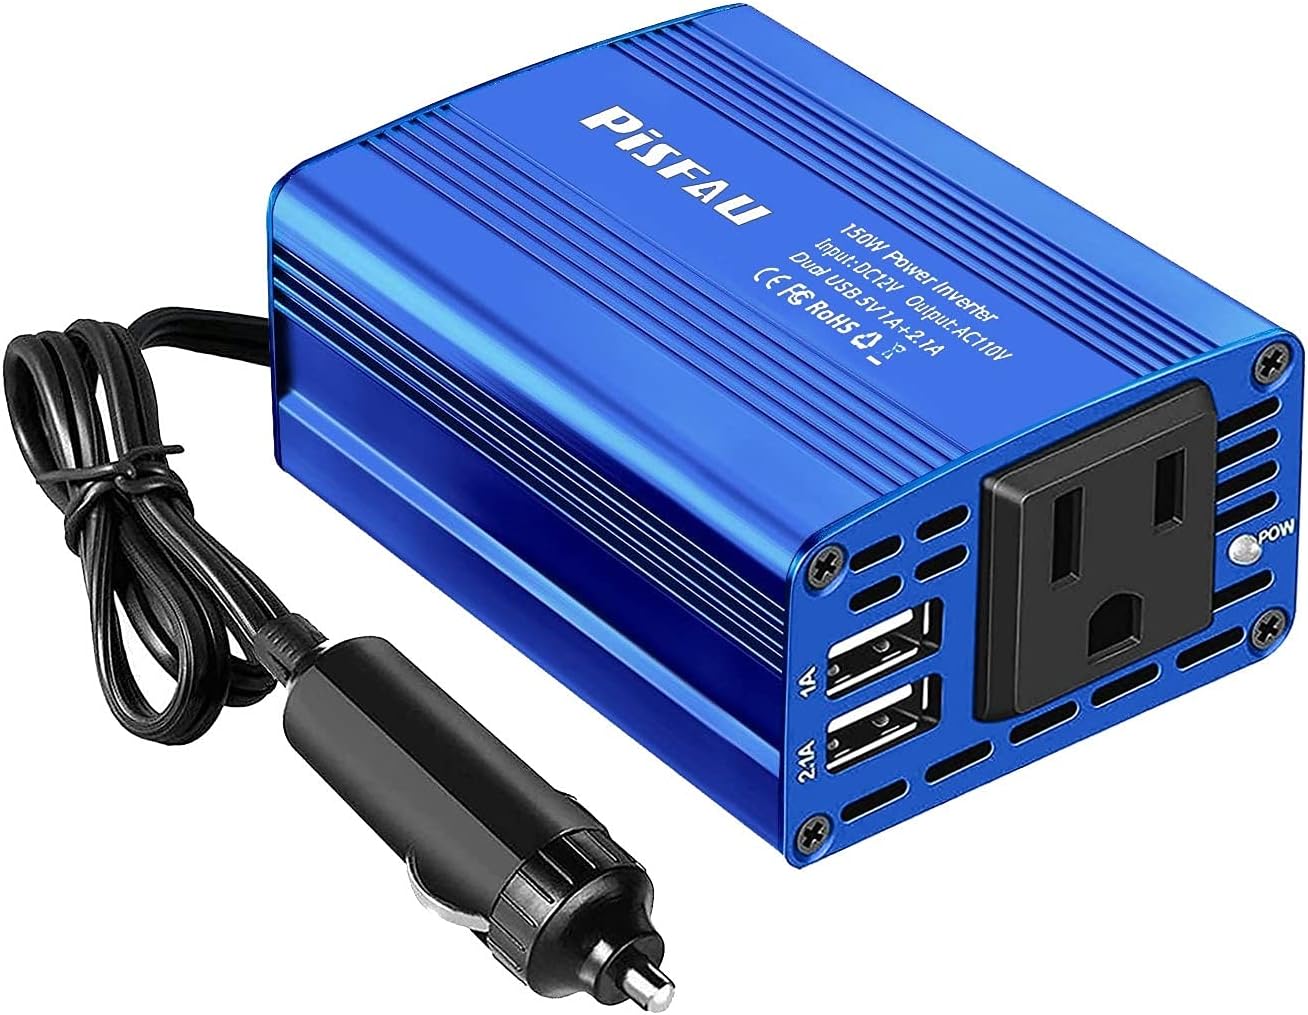 150W Power Inverter 12V DC to 110V AC Car Plug Adapter Outlet Converter with 3.1A Dual USB AC car Charger for Laptop Computer Black